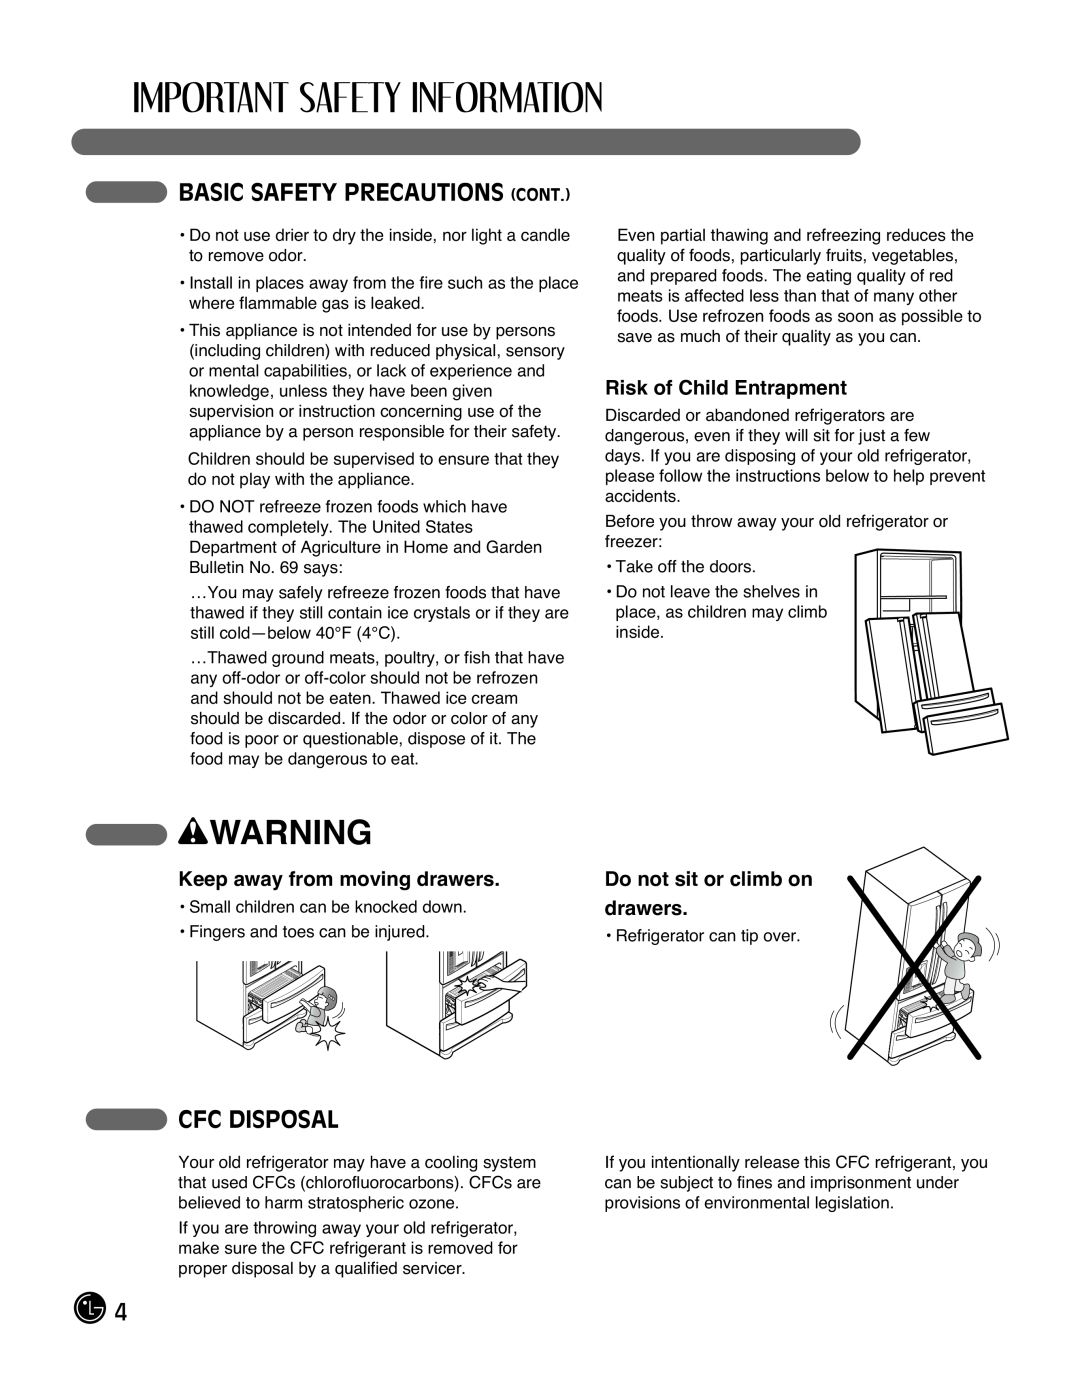 LG Electronics LMX25988ST owner manual Basic Safety Precautions Cont, Cfc Disposal, Risk of Child Entrapment, wWARNING 